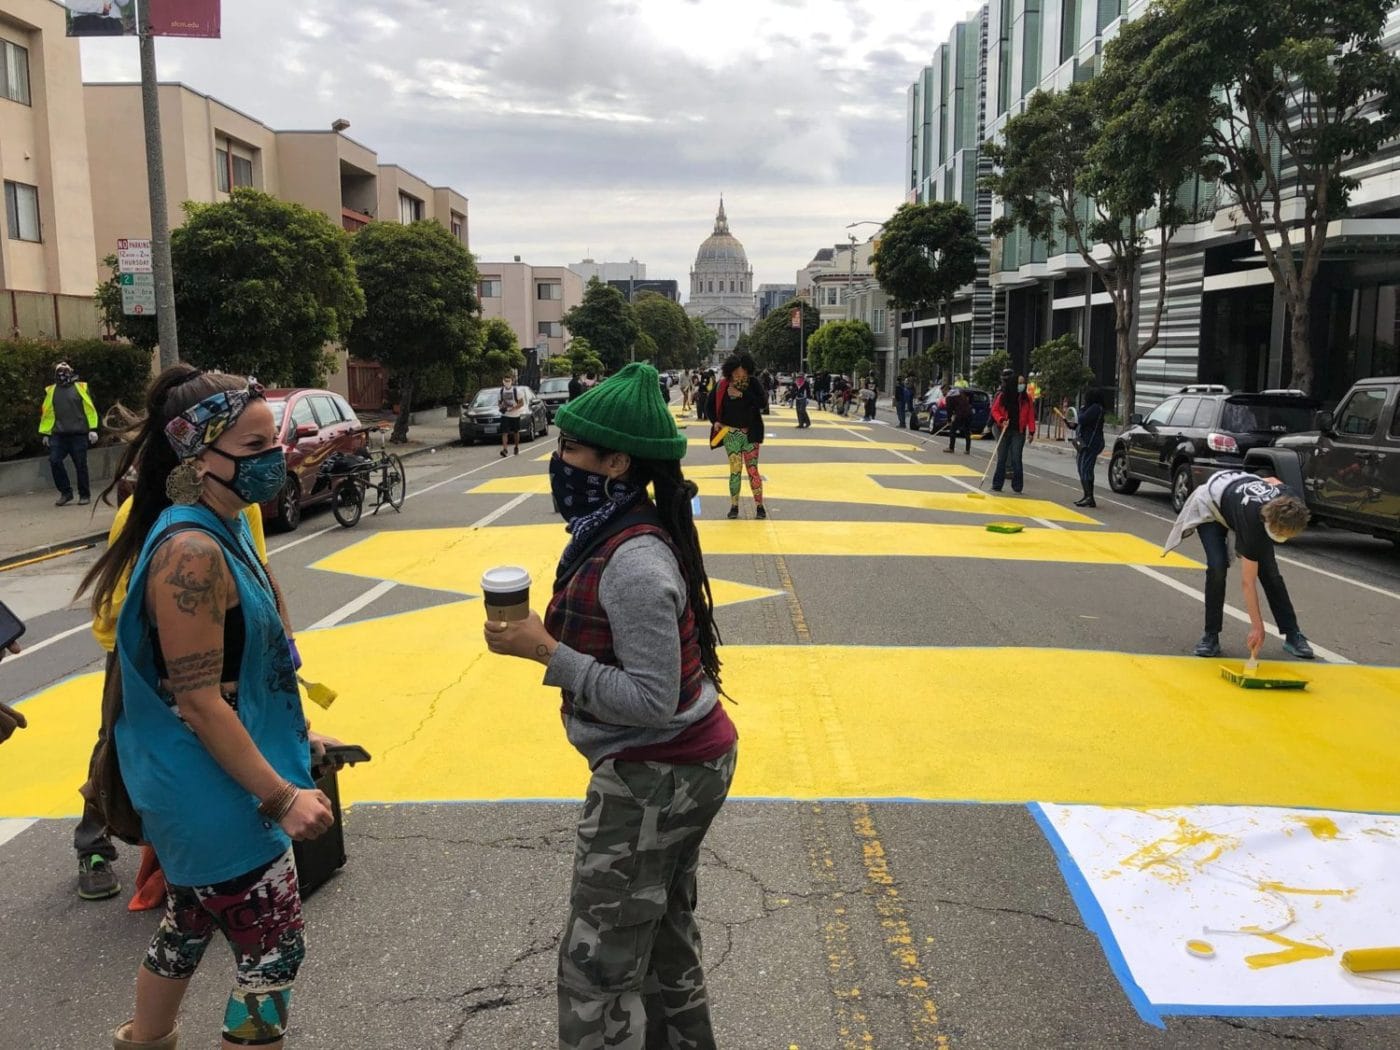 Melonie-Melorra-Green-Project-Level-lead-‘Black-Lives-Matter’-700-block-Fulton-street-painting-061220-2-by-Meaghan-Mitchell-Hoodline-1400x1050, 100+ volunteers paint ‘Black Lives Matter’ in center of San Francisco street, Local News & Views 